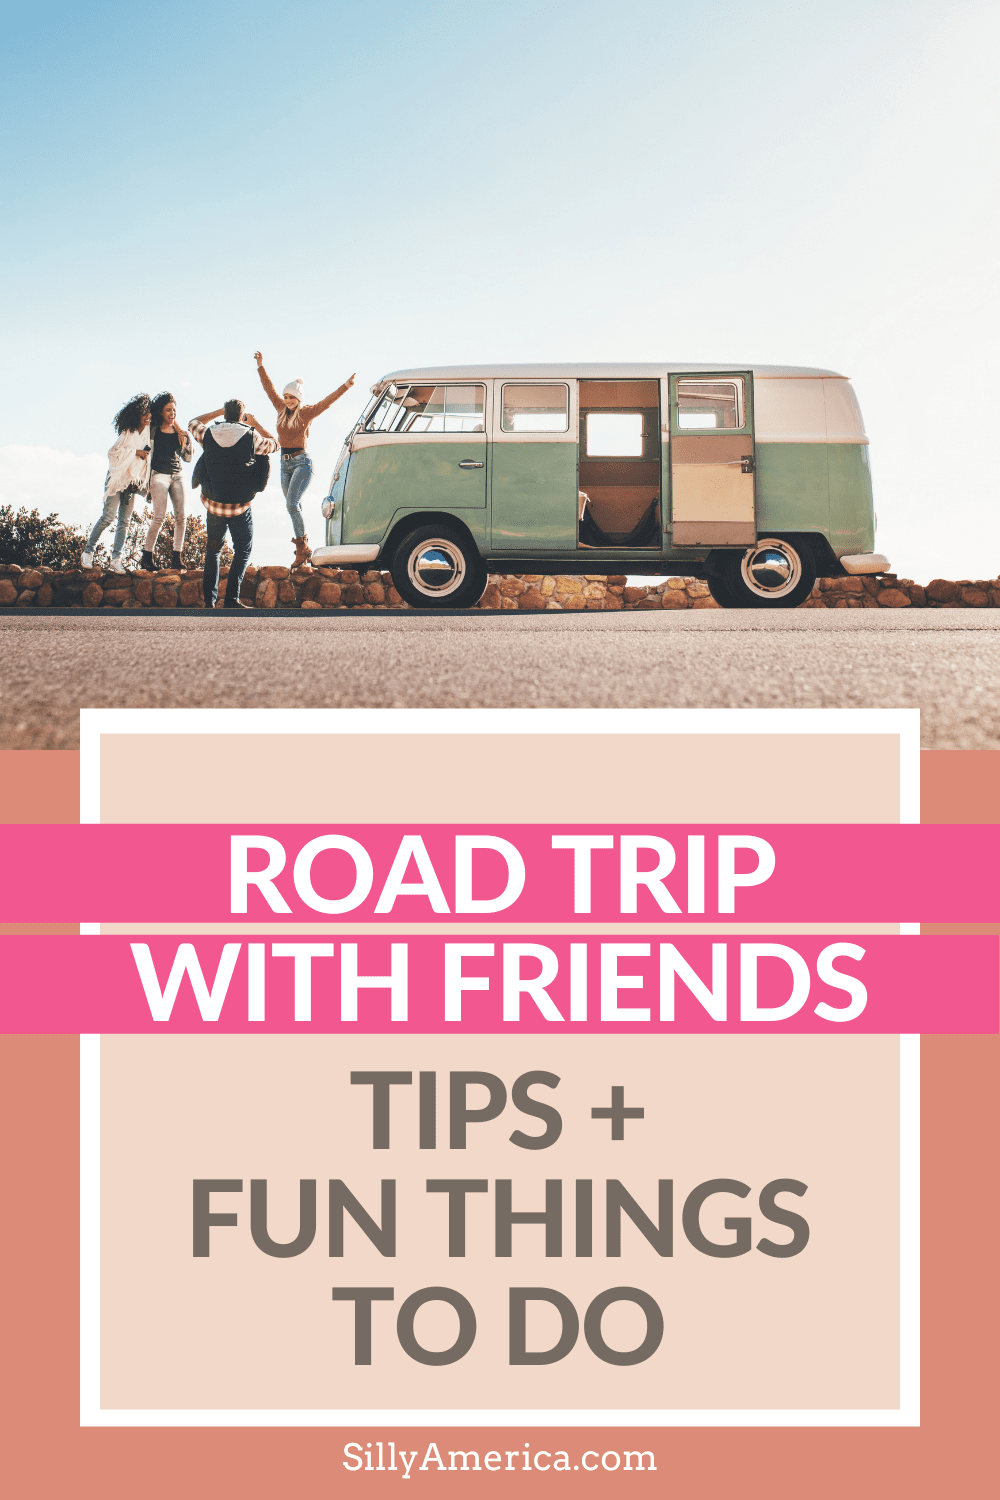 Windows down. Music blasting. Sunglasses on. It’s time to take a road trip with friends. Road trips are an amazing way to see the country. But before your bestie calls shotgun, here are some helpful tips for taking a road trip with friends, fun things to do on a road trip with friends, and some suggestions for routes and destinations to take together. Ready to hit the road? #RoadTrip #RoadTripWithFriends #BestFriends #Vacation #RoadTripPlanning